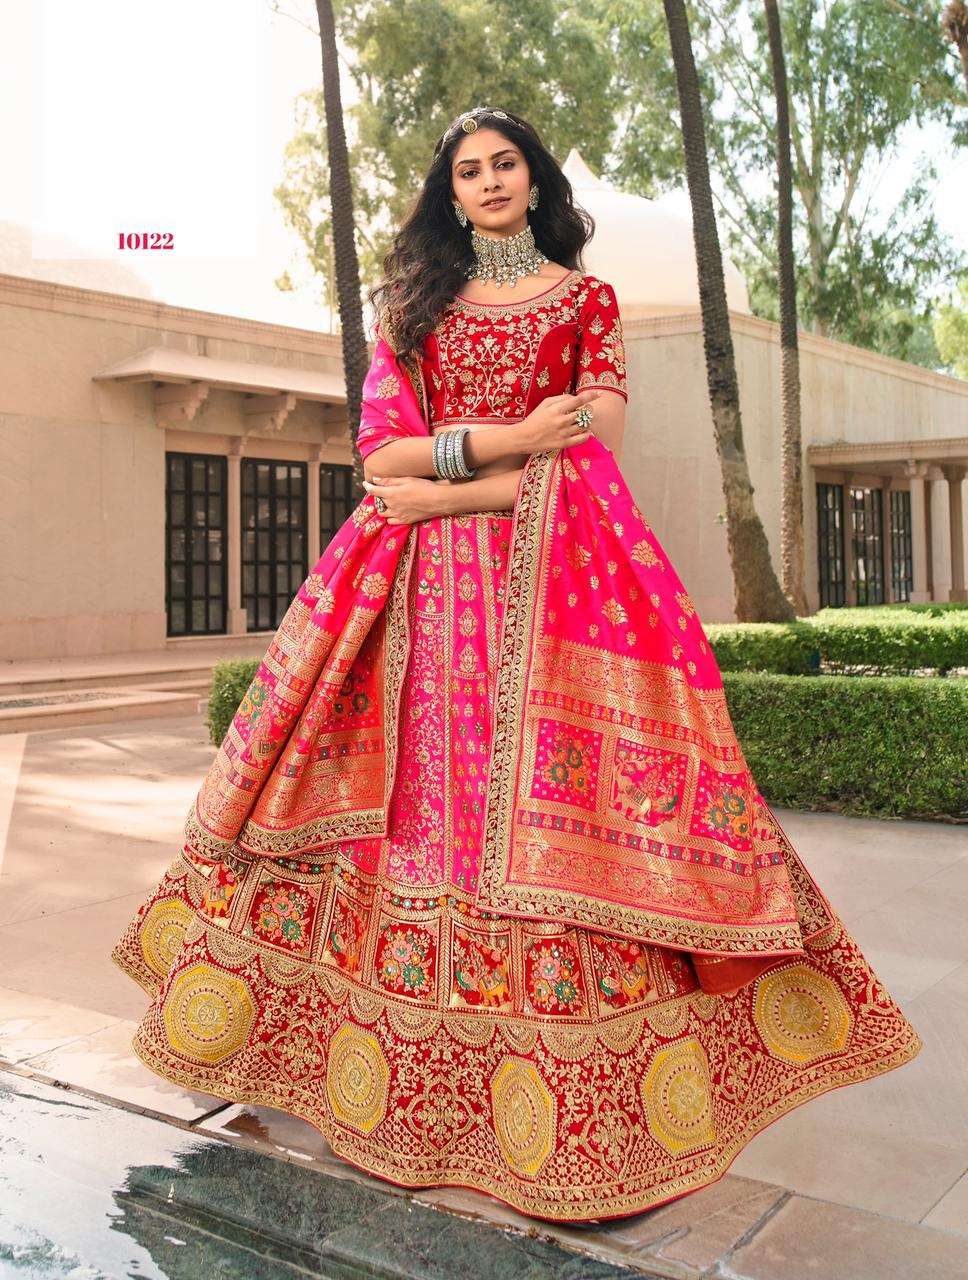 Unstitched Stylist Designer Party Wear Bridal Lehenga, Size: Free at Rs  1850 in Surat